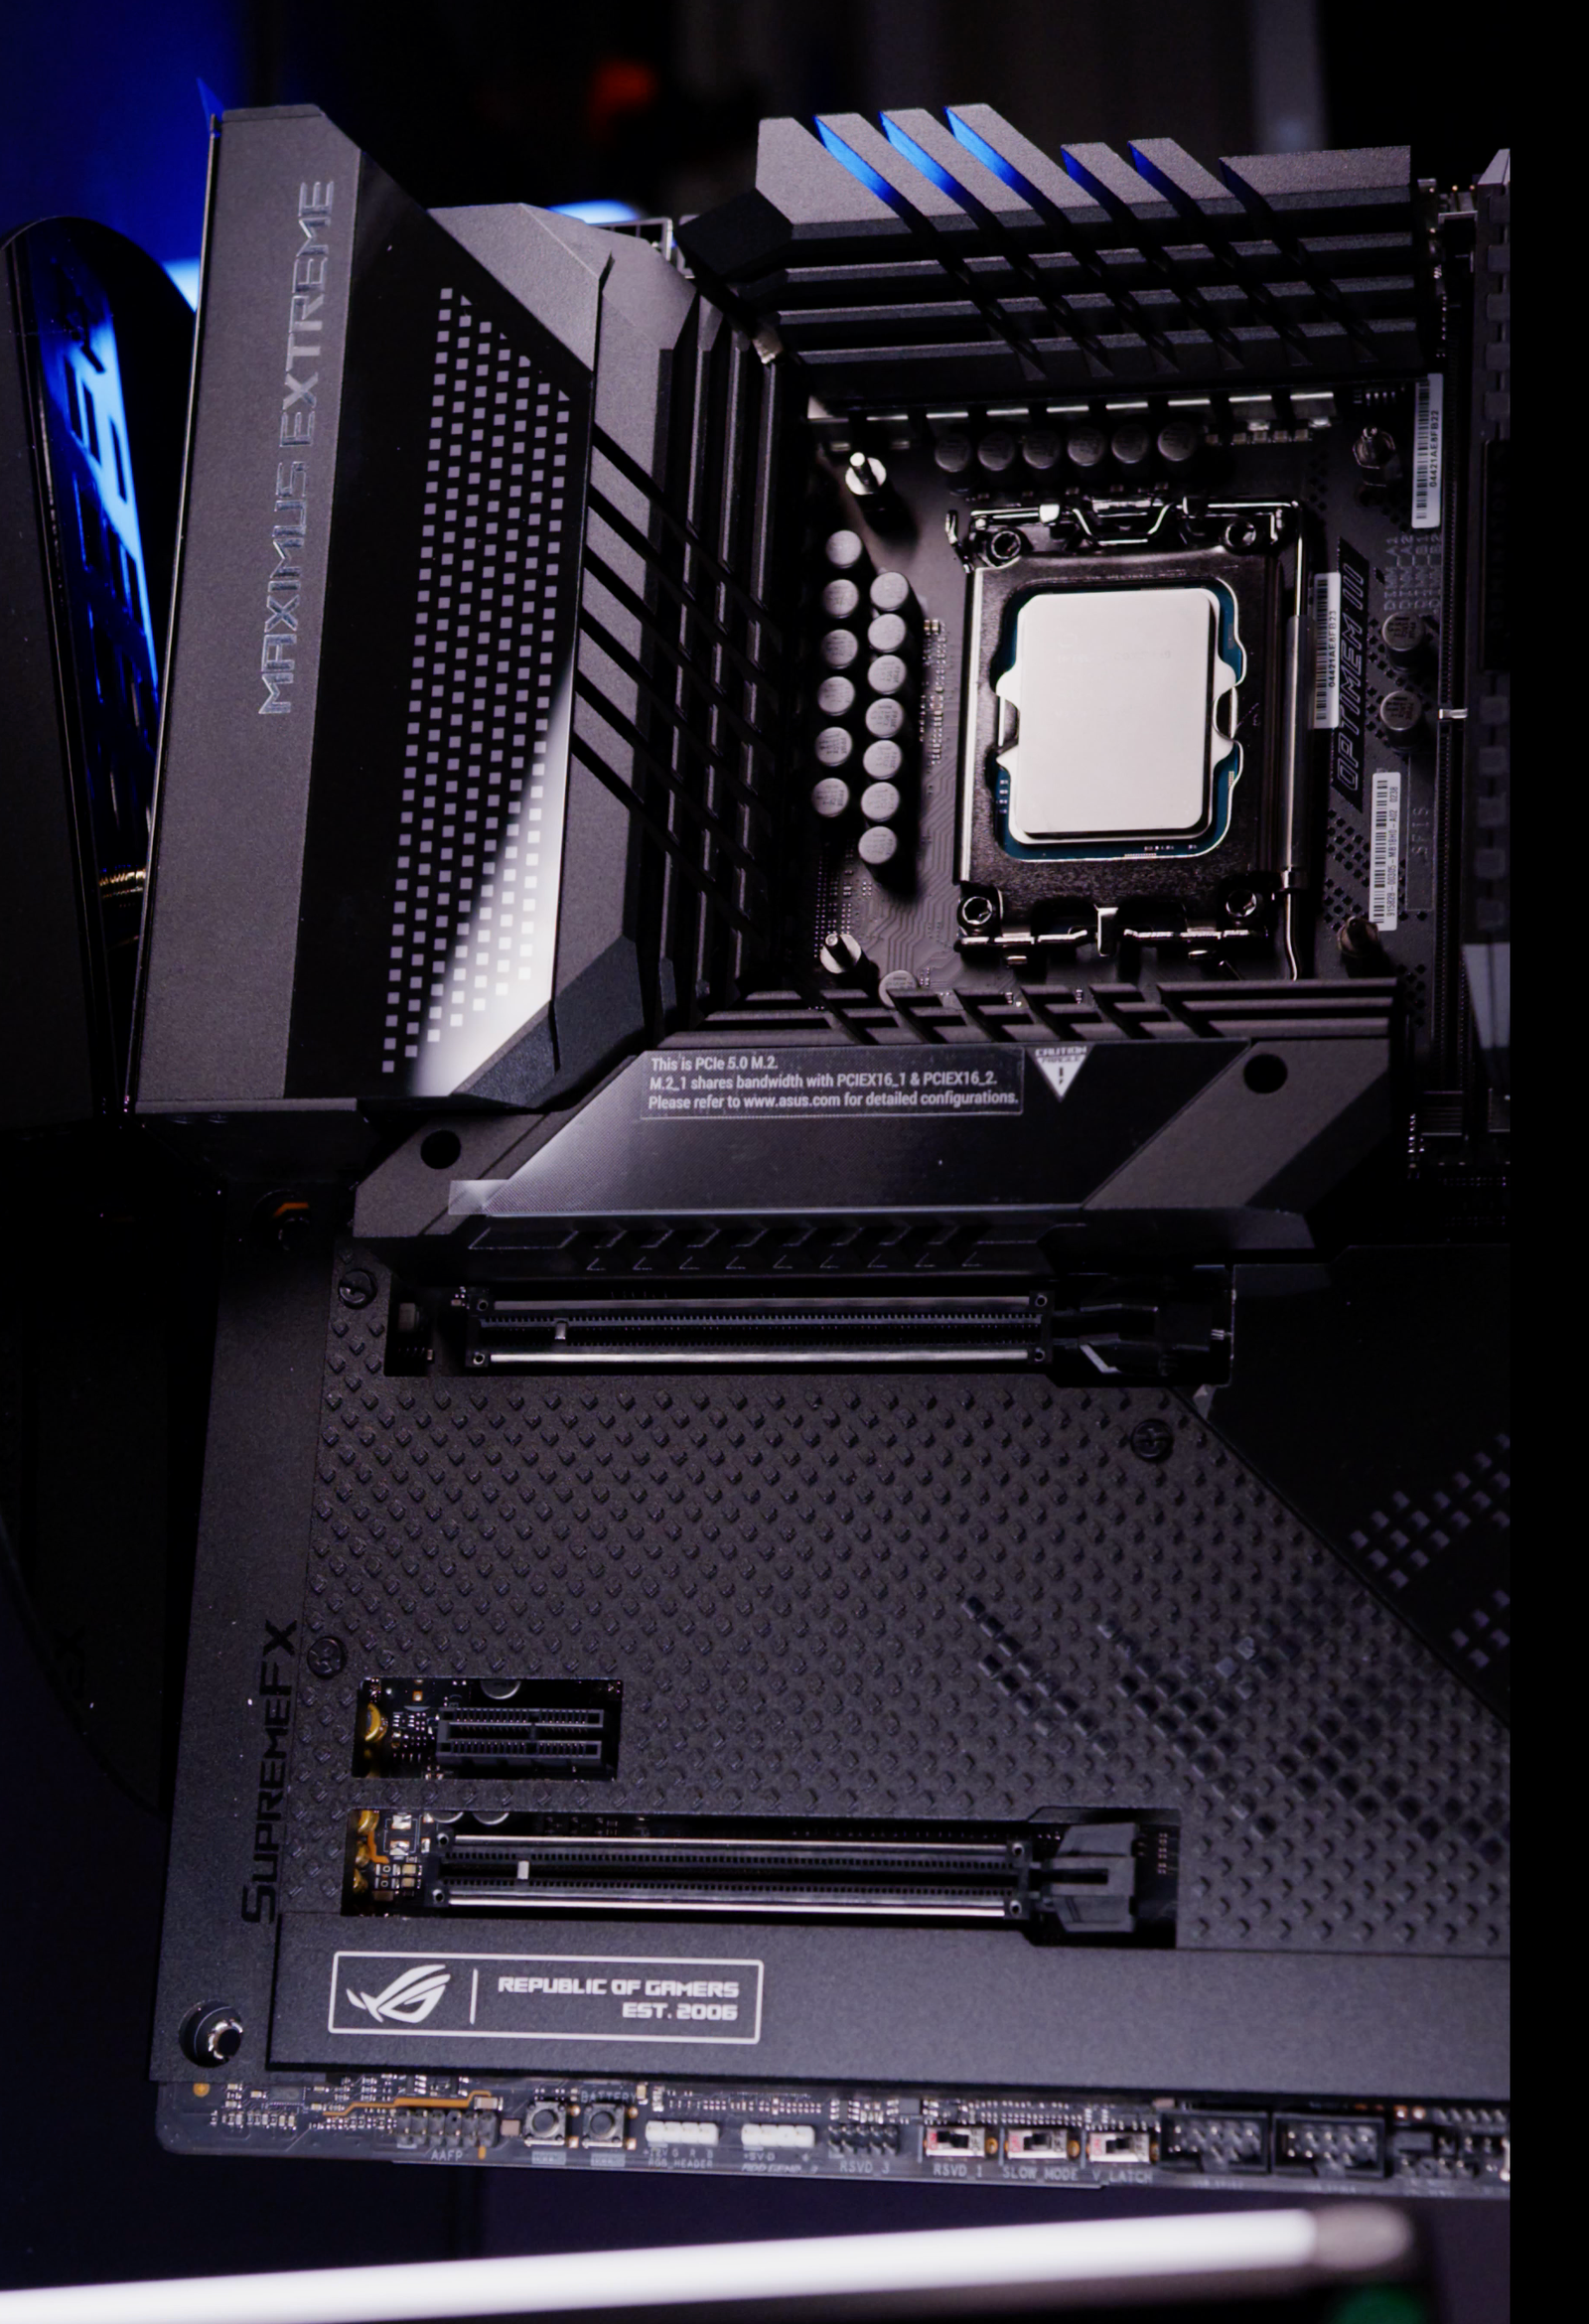 Asus ROG Maximus Z690 Outrageous overview: Glorious, luxurious motherboard extra